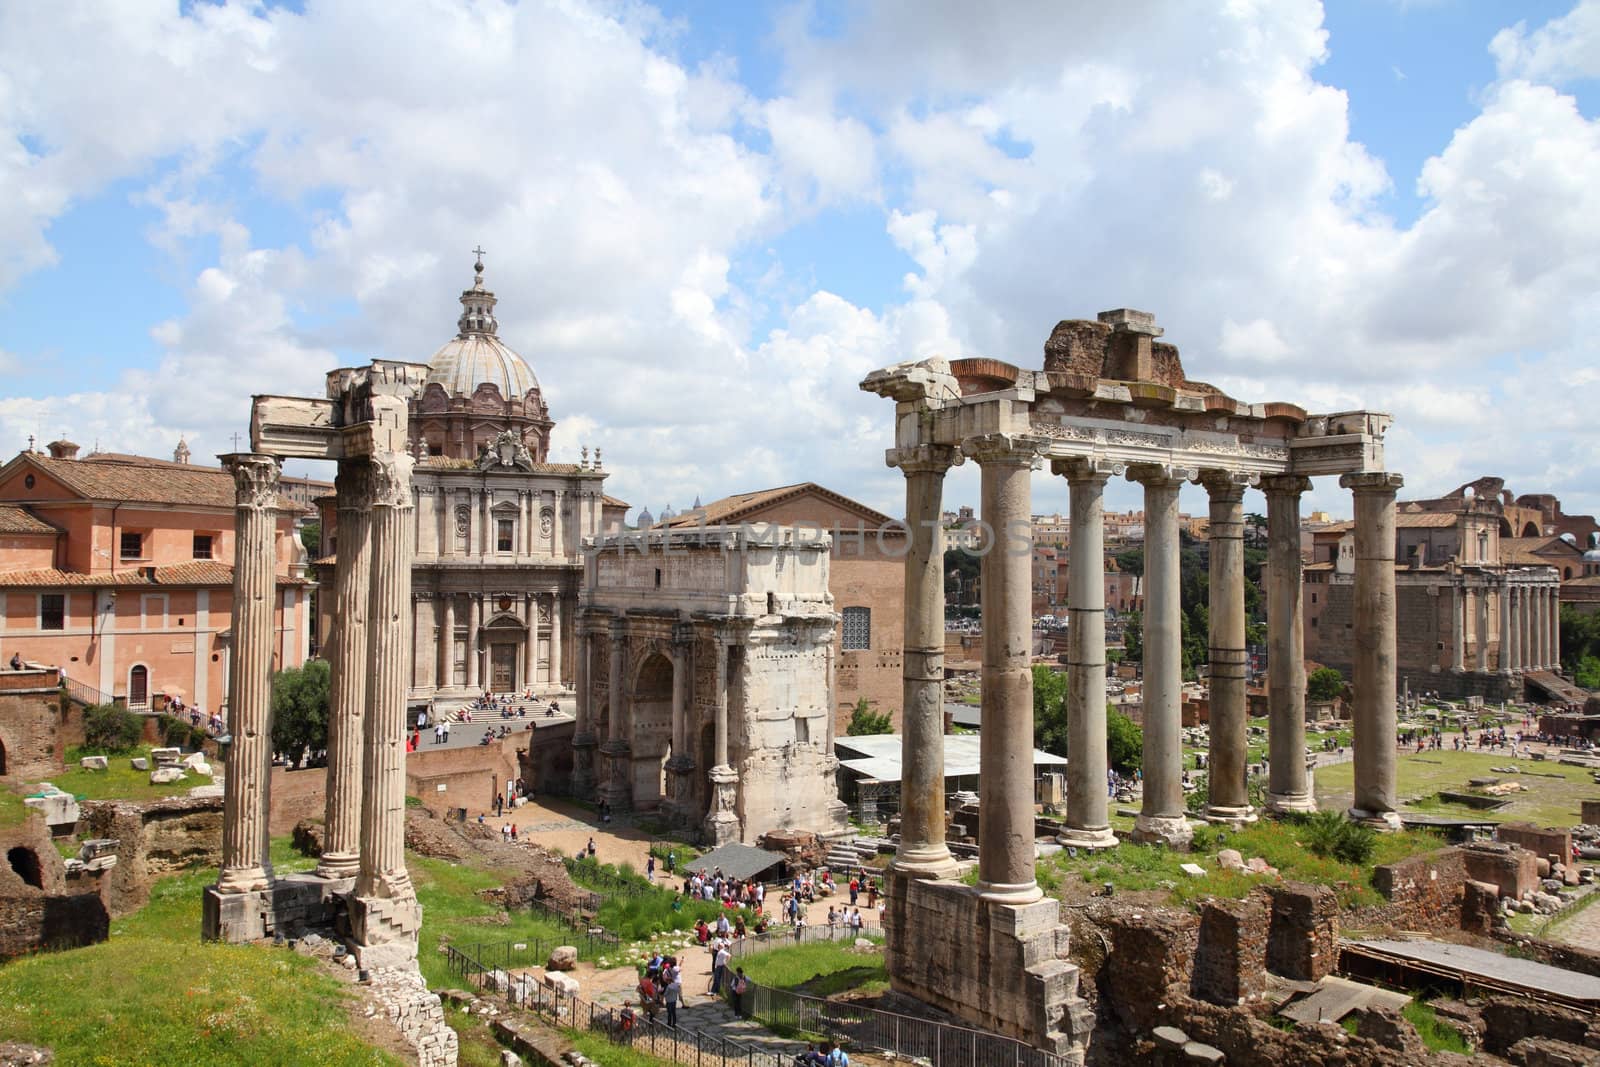 Rome, Italy. One of the most famous landmarks in the world - Roman Forum.